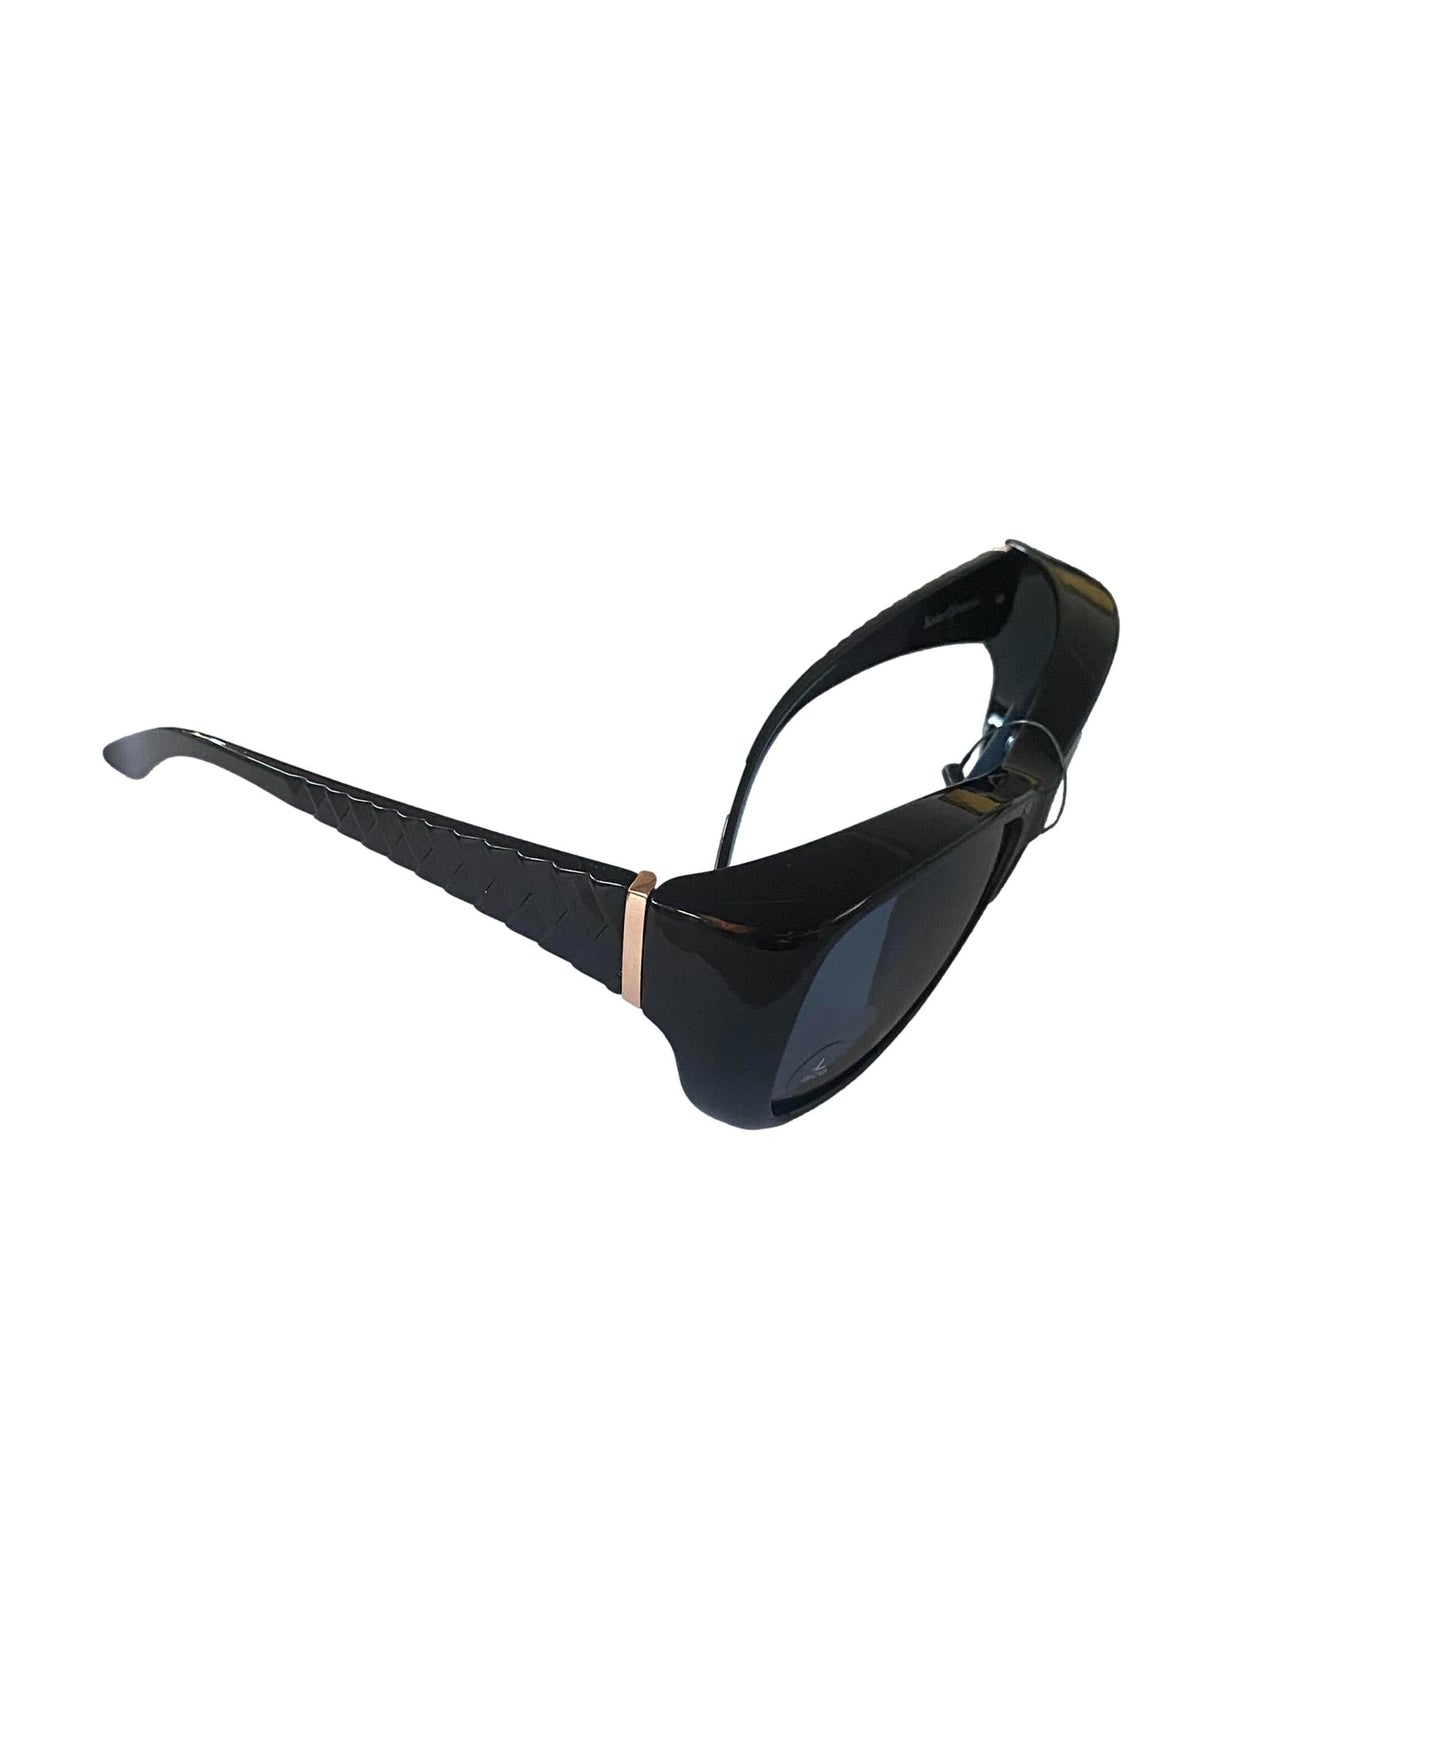 Solar Shield Fits Over FO-031 LG black polarized sunglasses - Side View